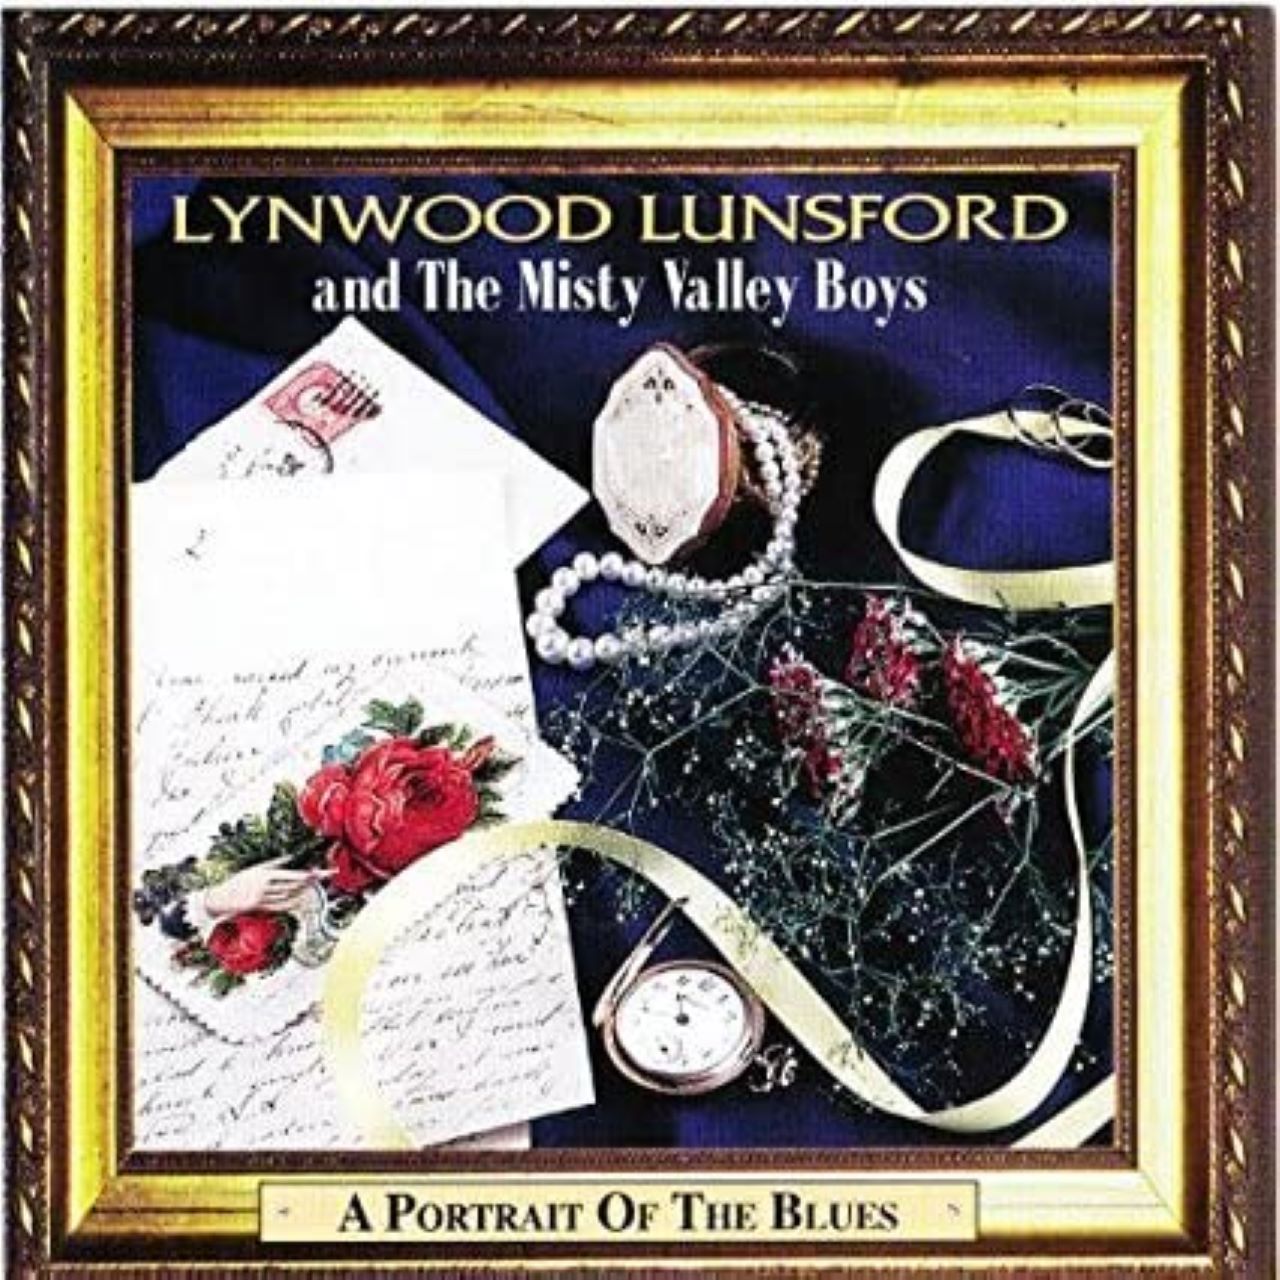 Lynwood Lunsford And The Misty Valley Boys - A Portrait Of The Blues cover album